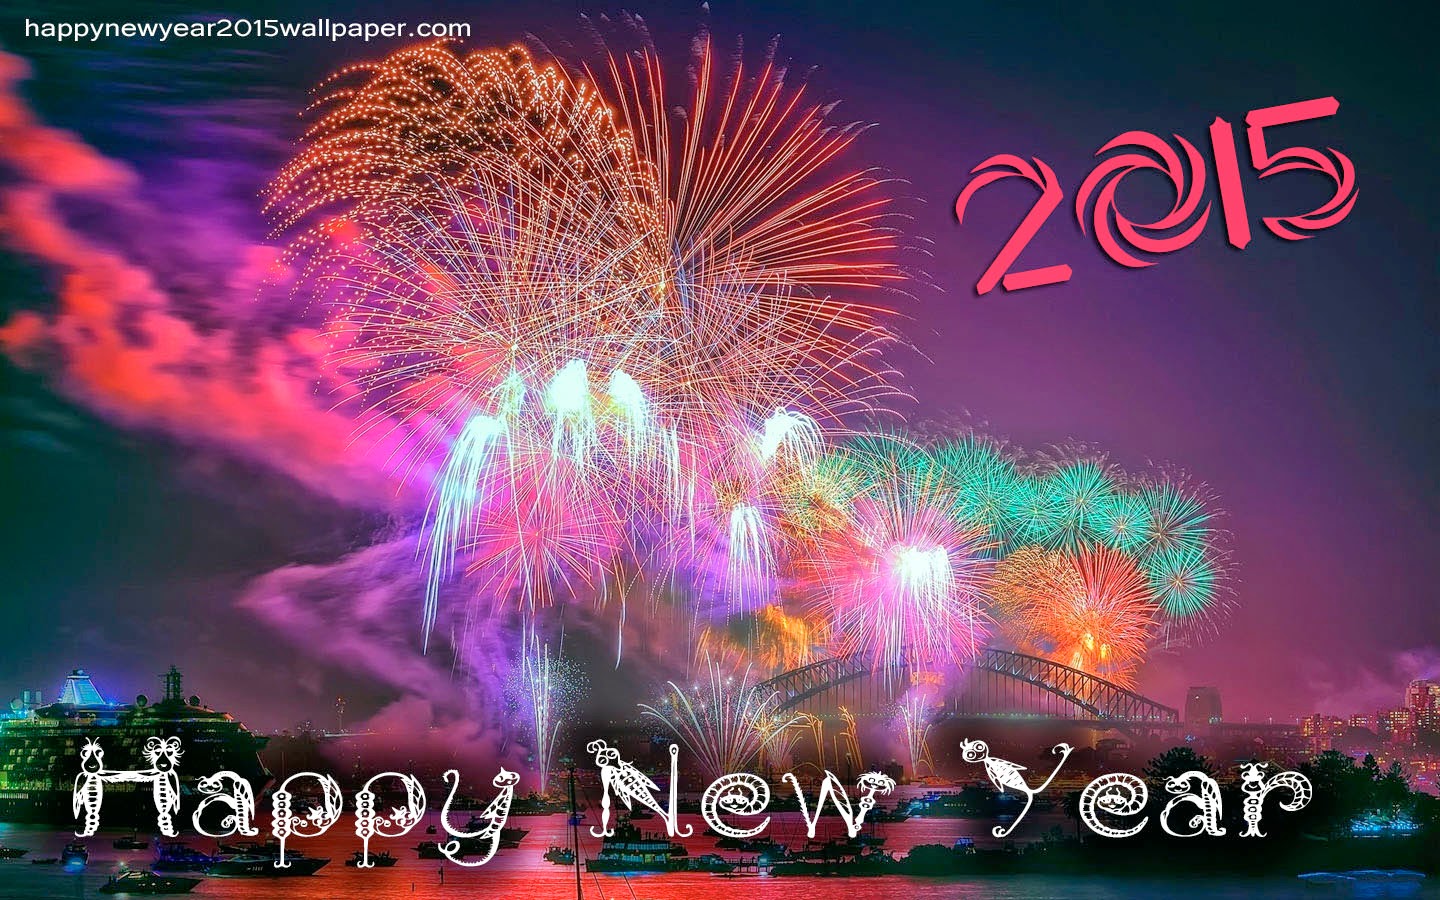 2016 happy new year wallpapers 2015   Grasscloth Wallpaper 1440x900